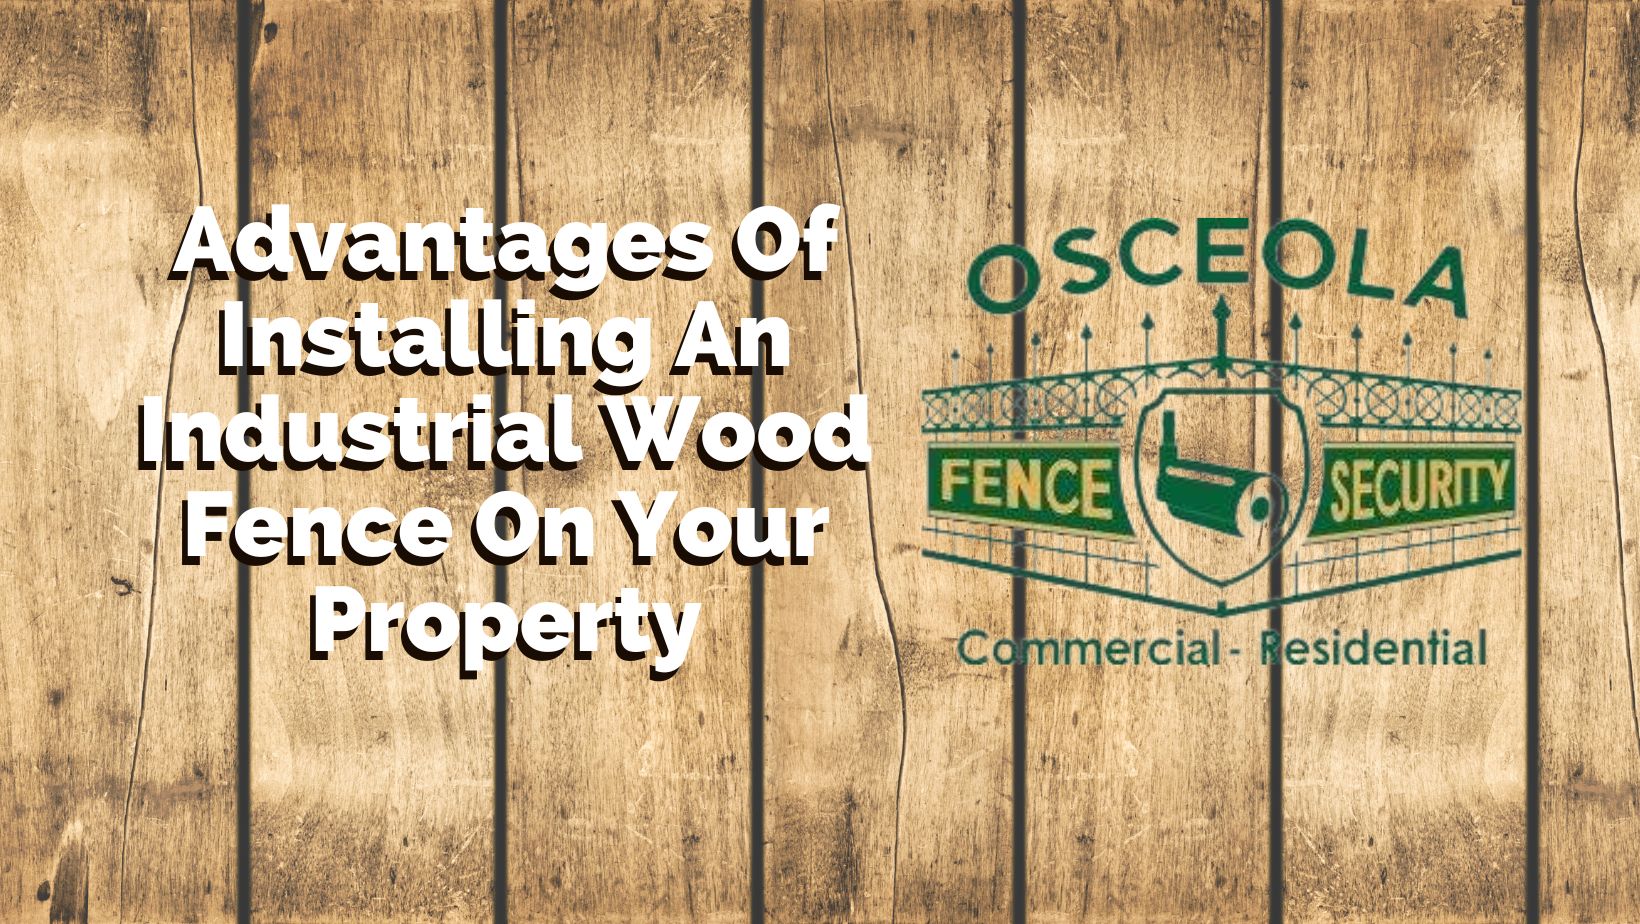 Advantages Of Installing An Industrial Wood Fence On Your Property